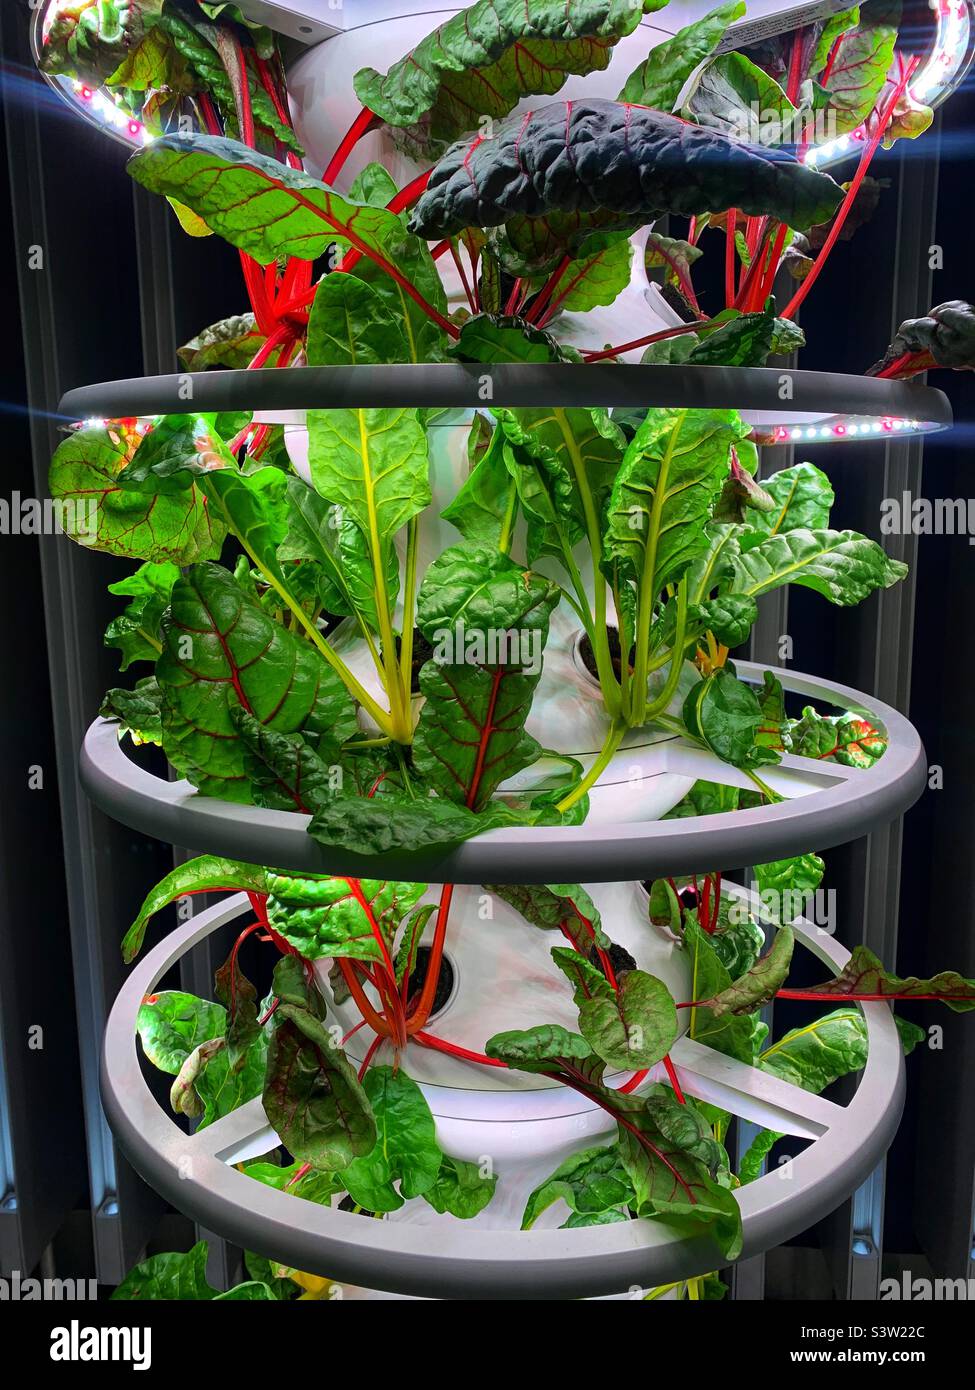 Chard growing in hydroponic vertical garden Stock Photo